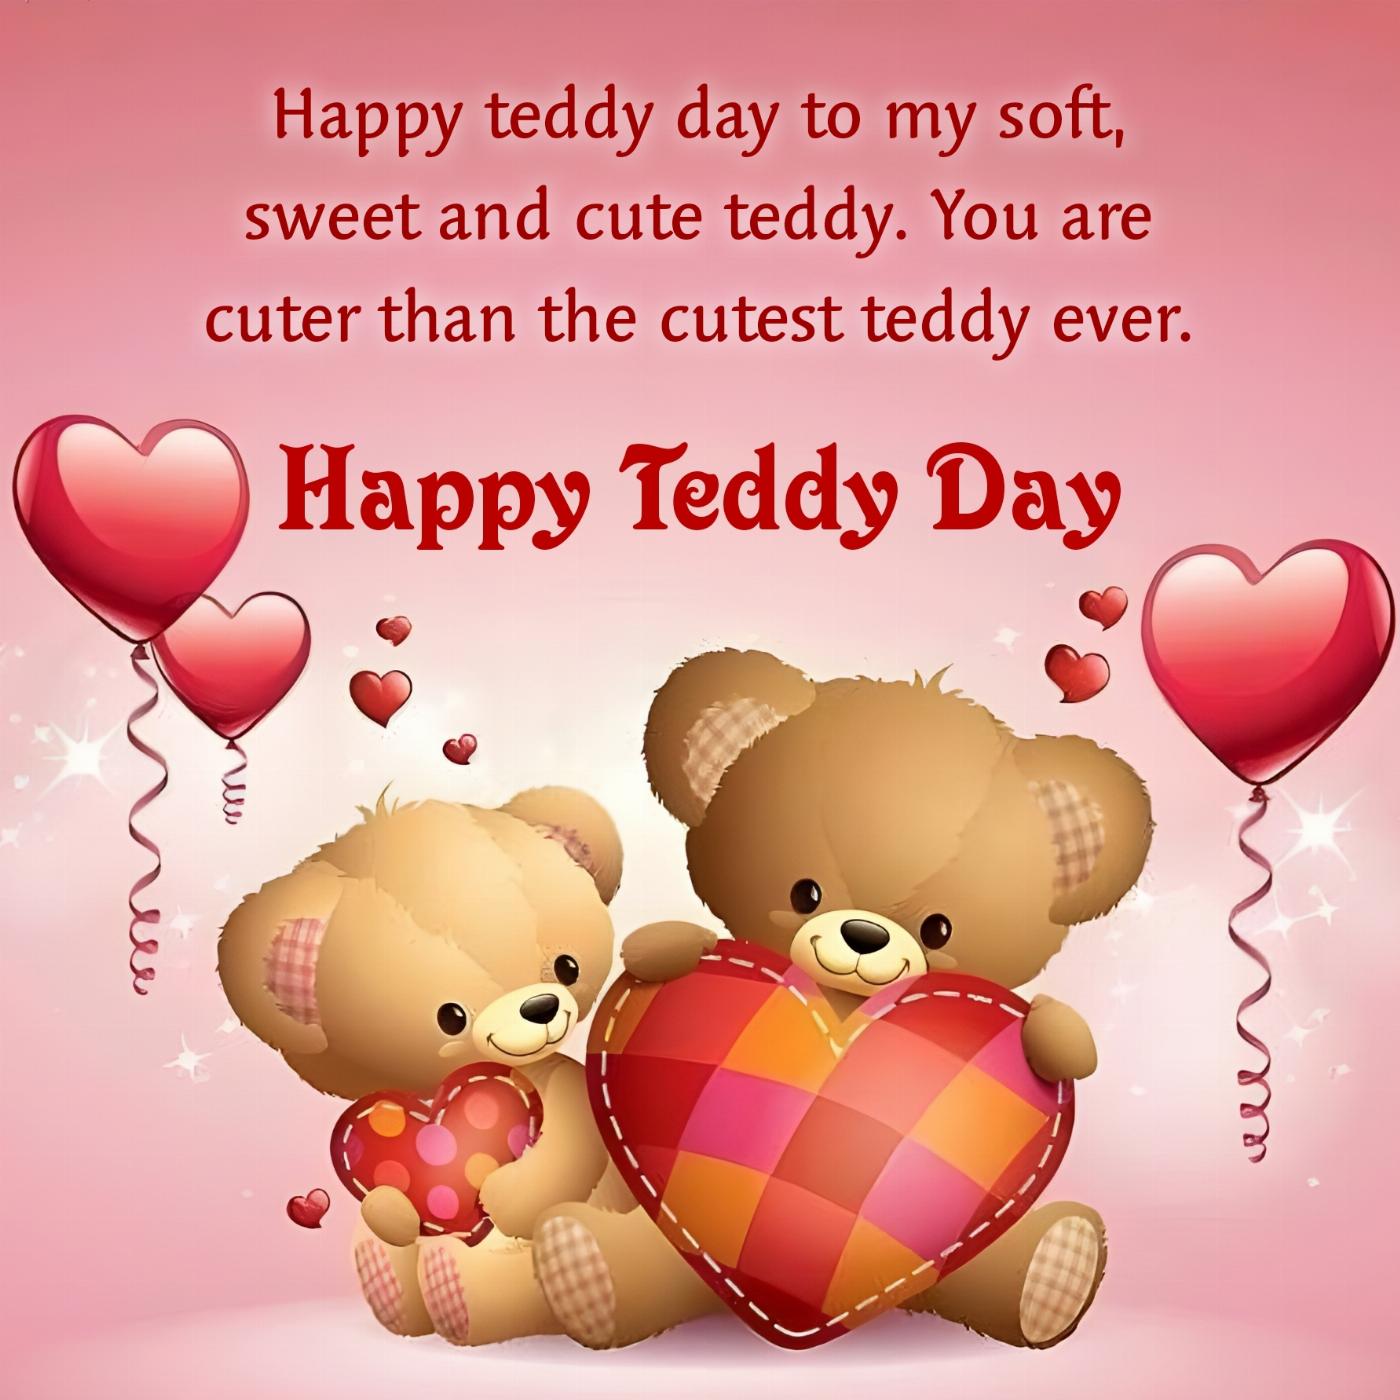 Happy teddy day to my soft sweet and cute teddy